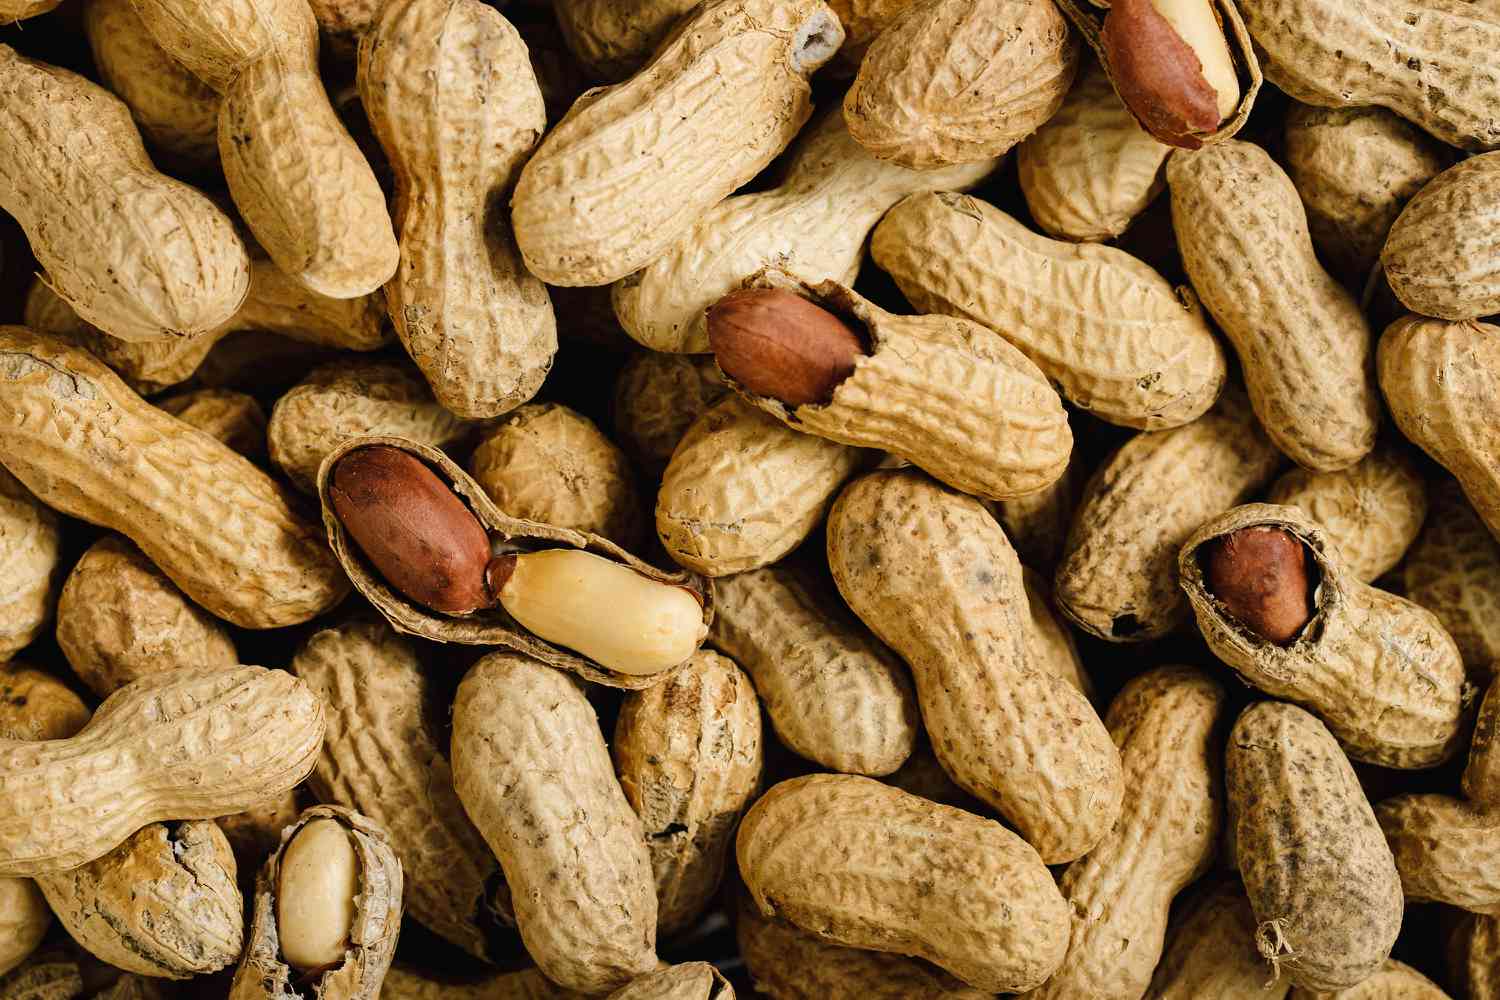 The FDA Just Approved a Drug to Treat Severe Food Allergies